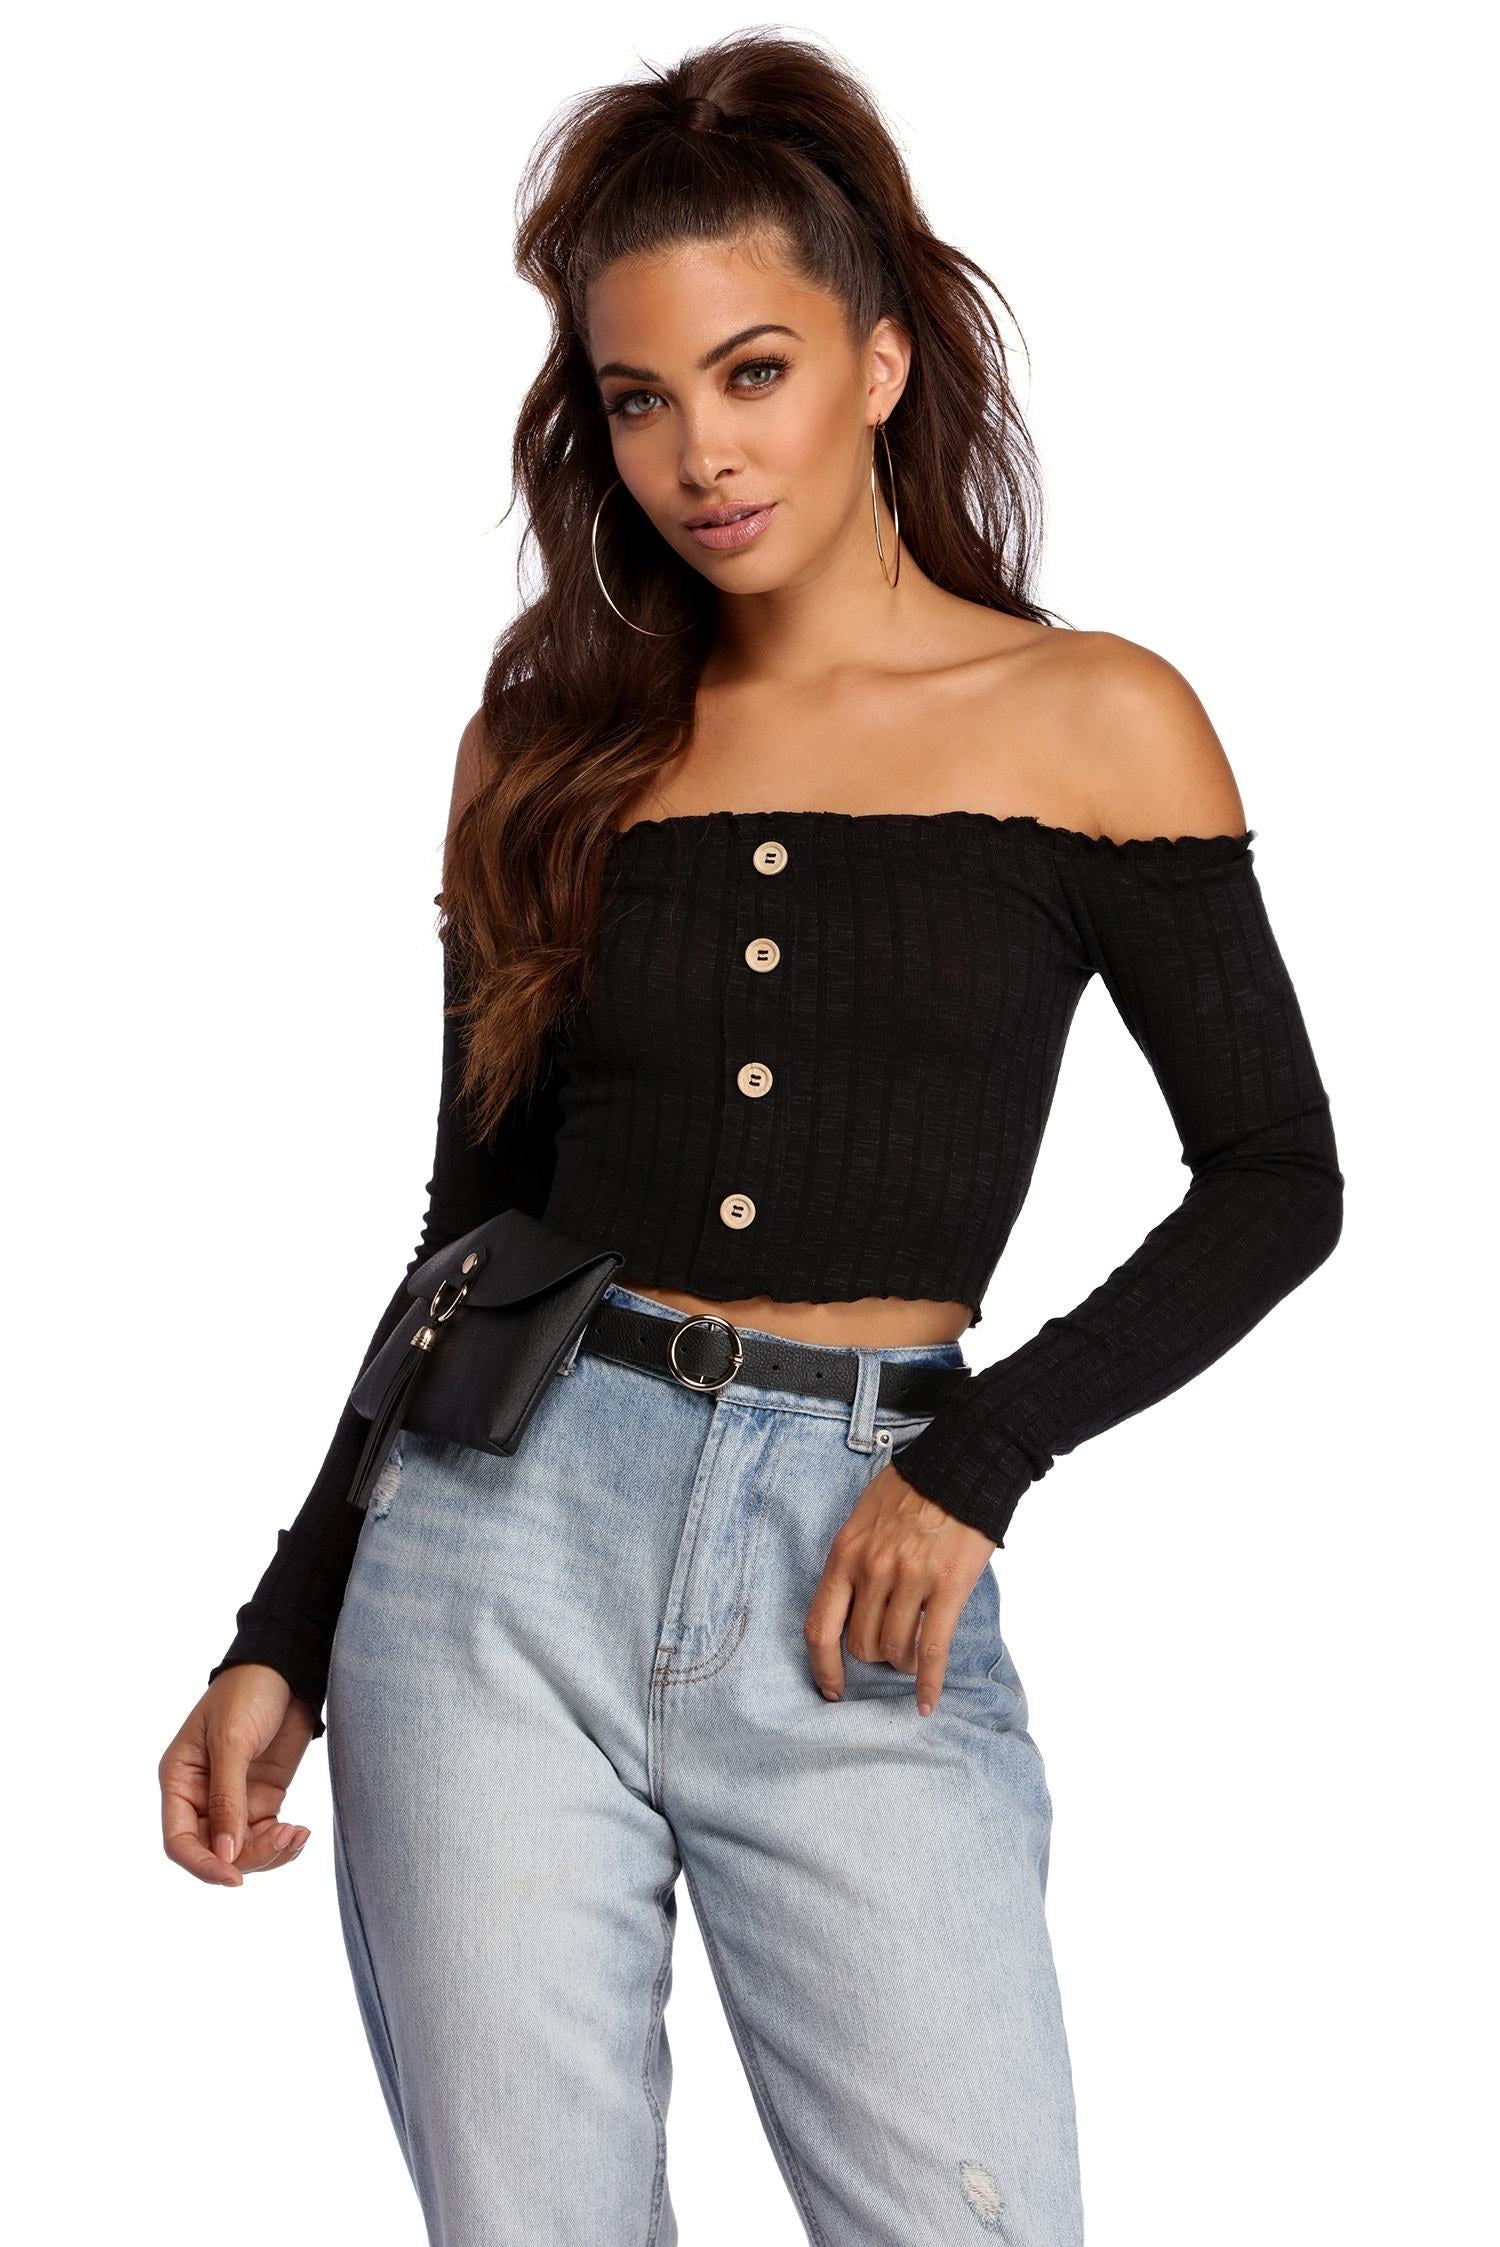 Get Stylish With Knit Crop Top - Lady Occasions